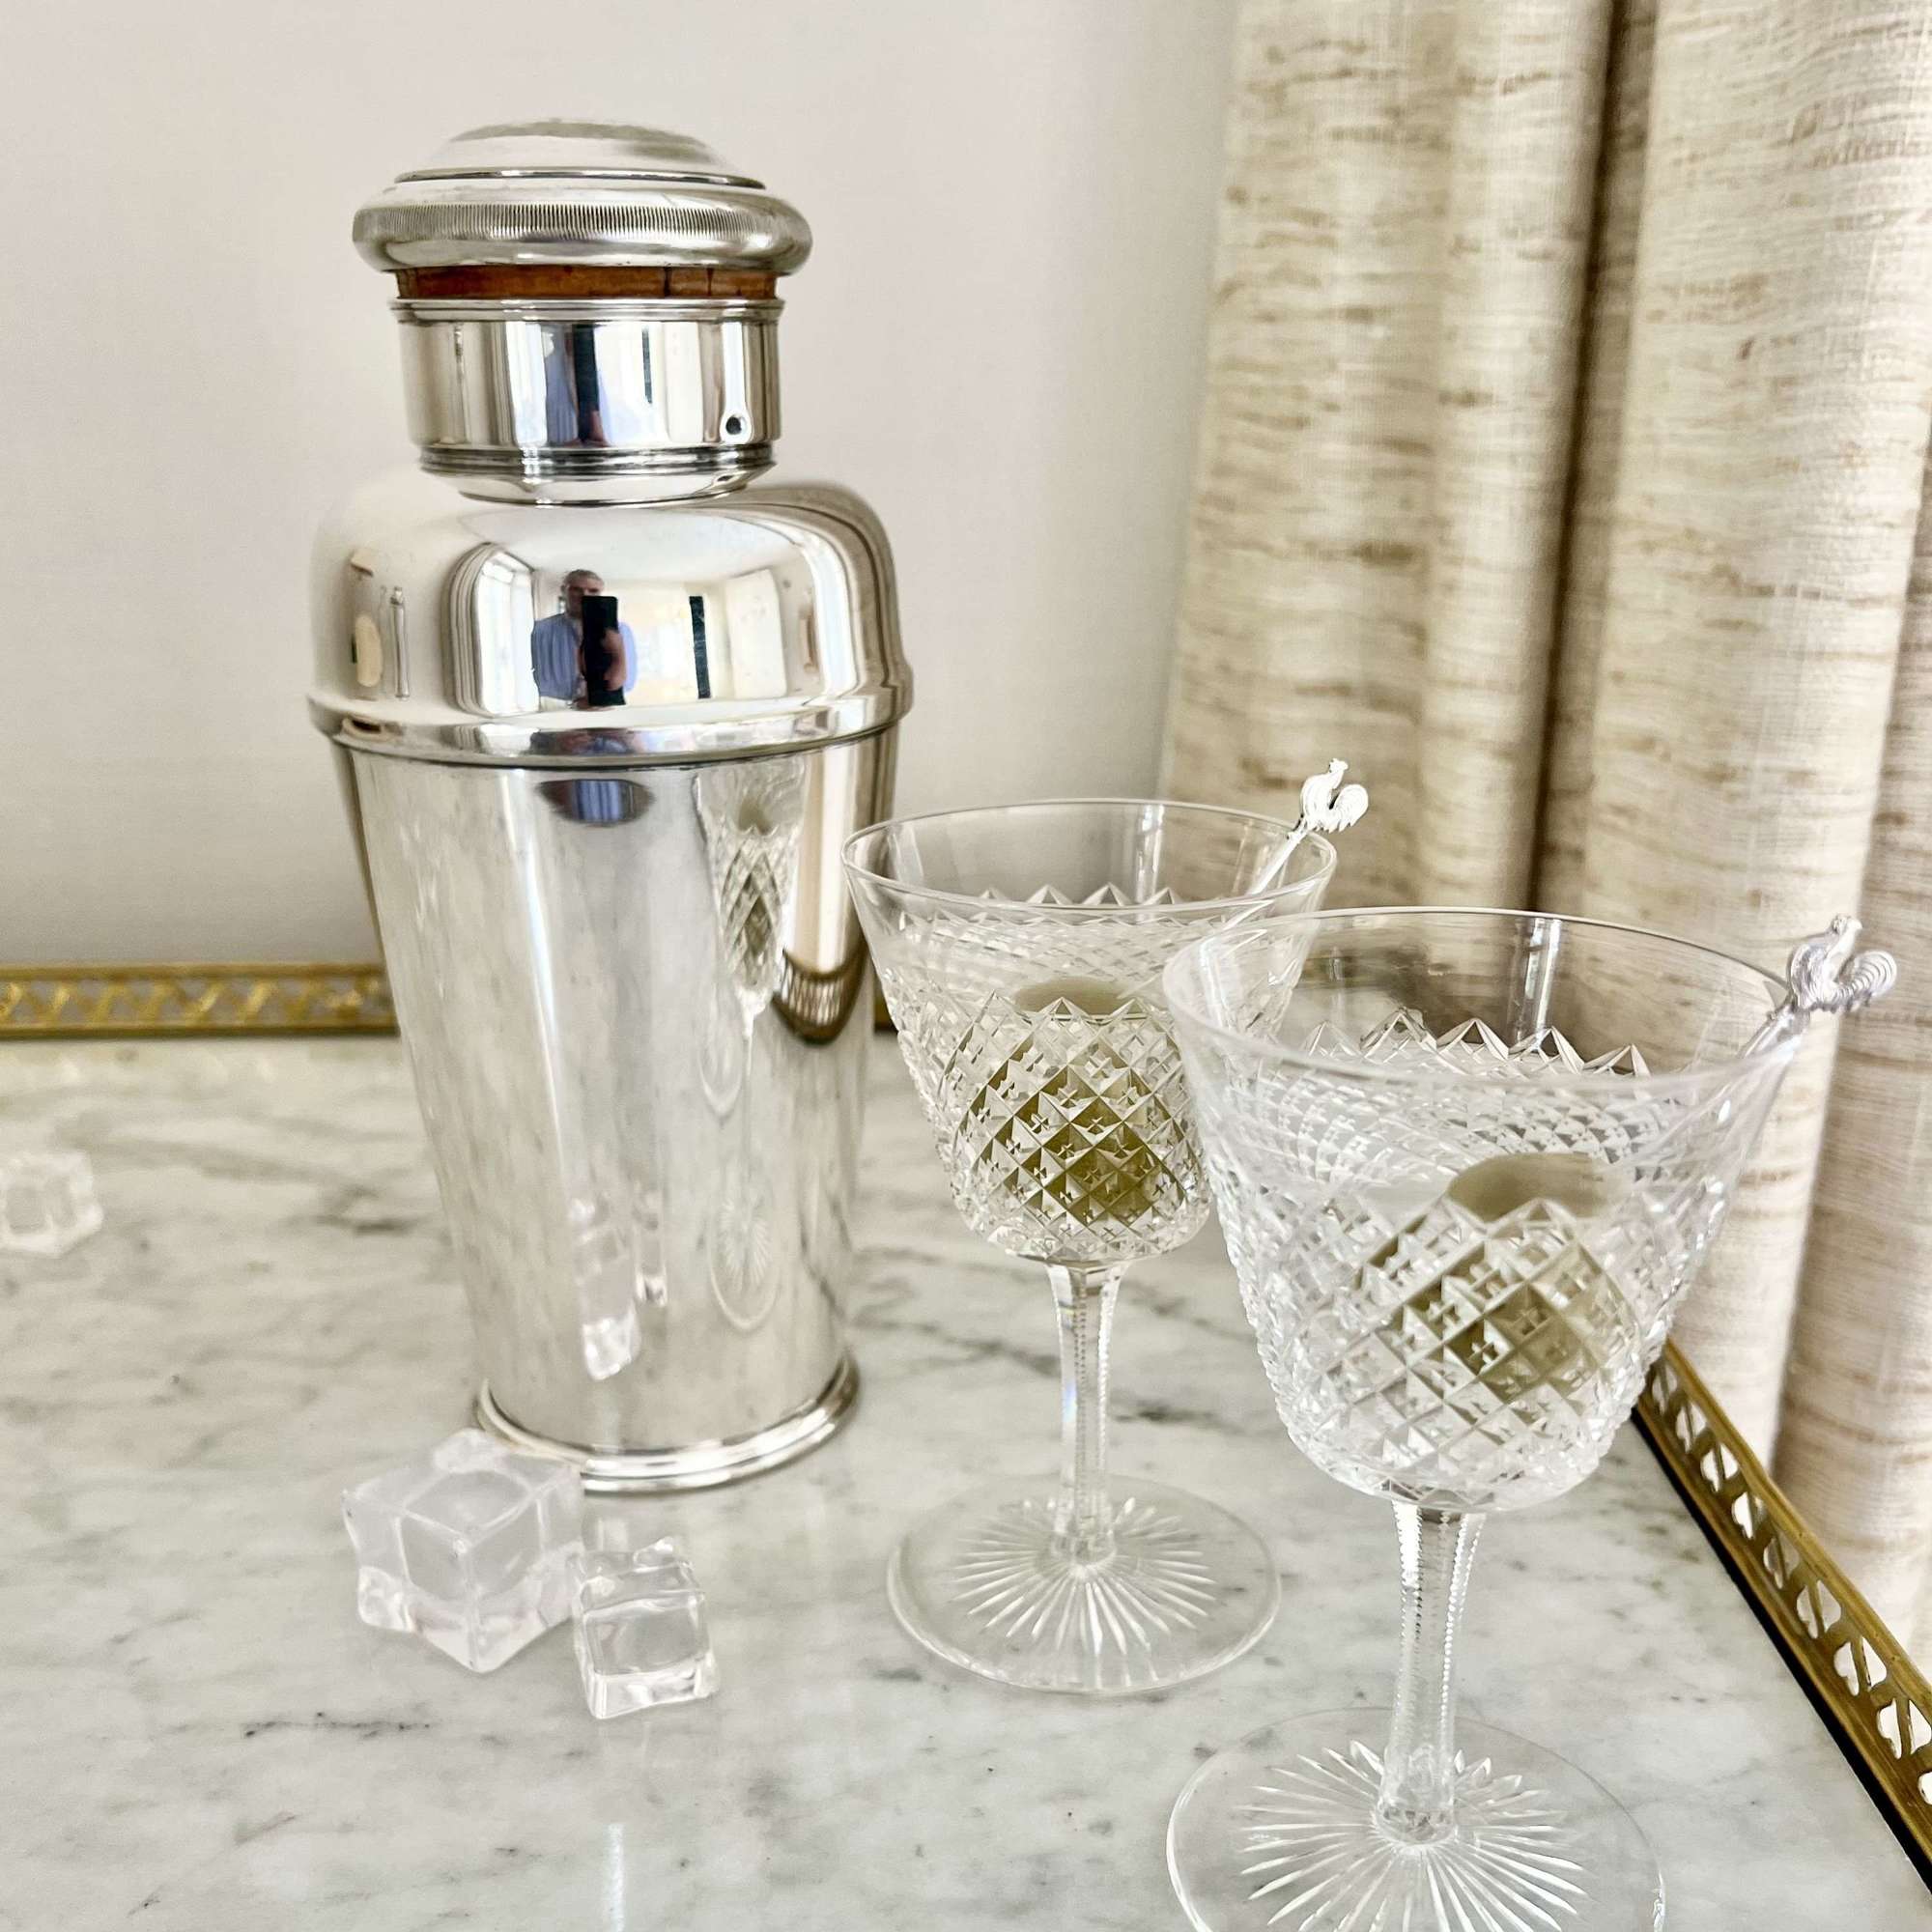 Rare Harrod’s of London 1.5 pint silver plated & cork cocktail shaker